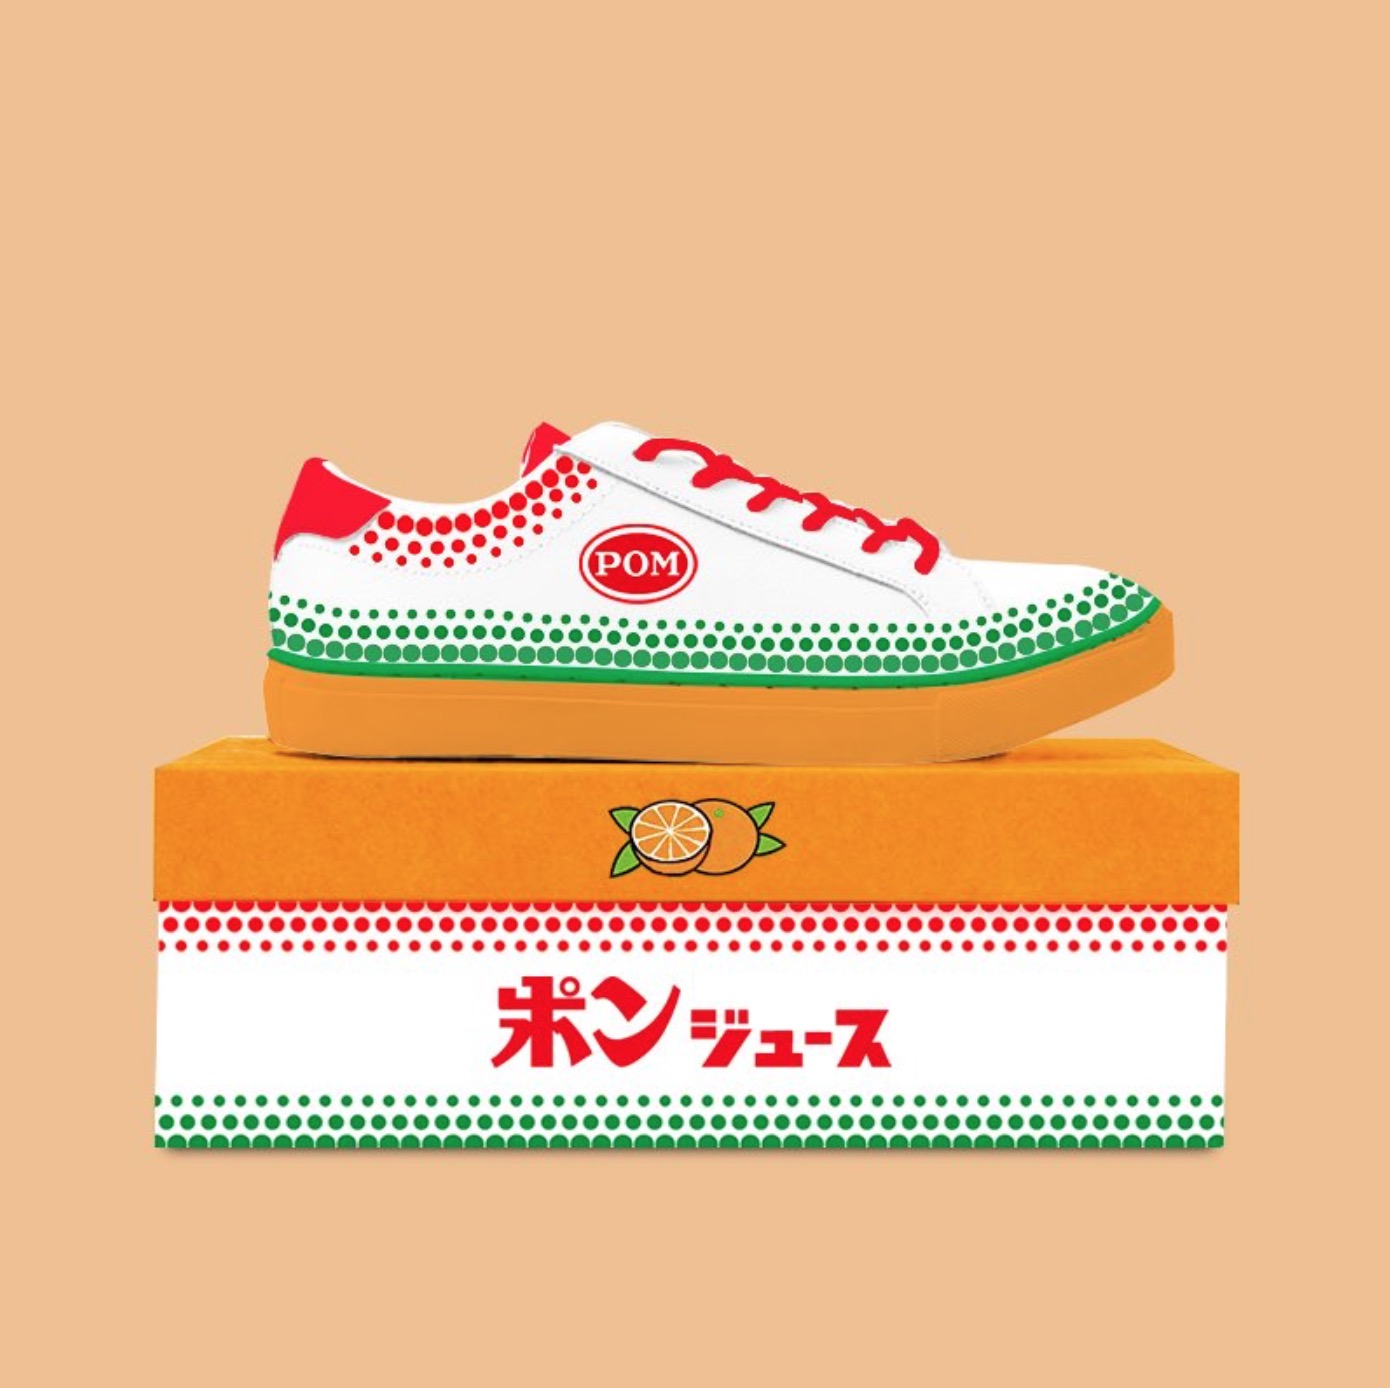 Japanese designer creates dream sneakers that everyone wants to buy